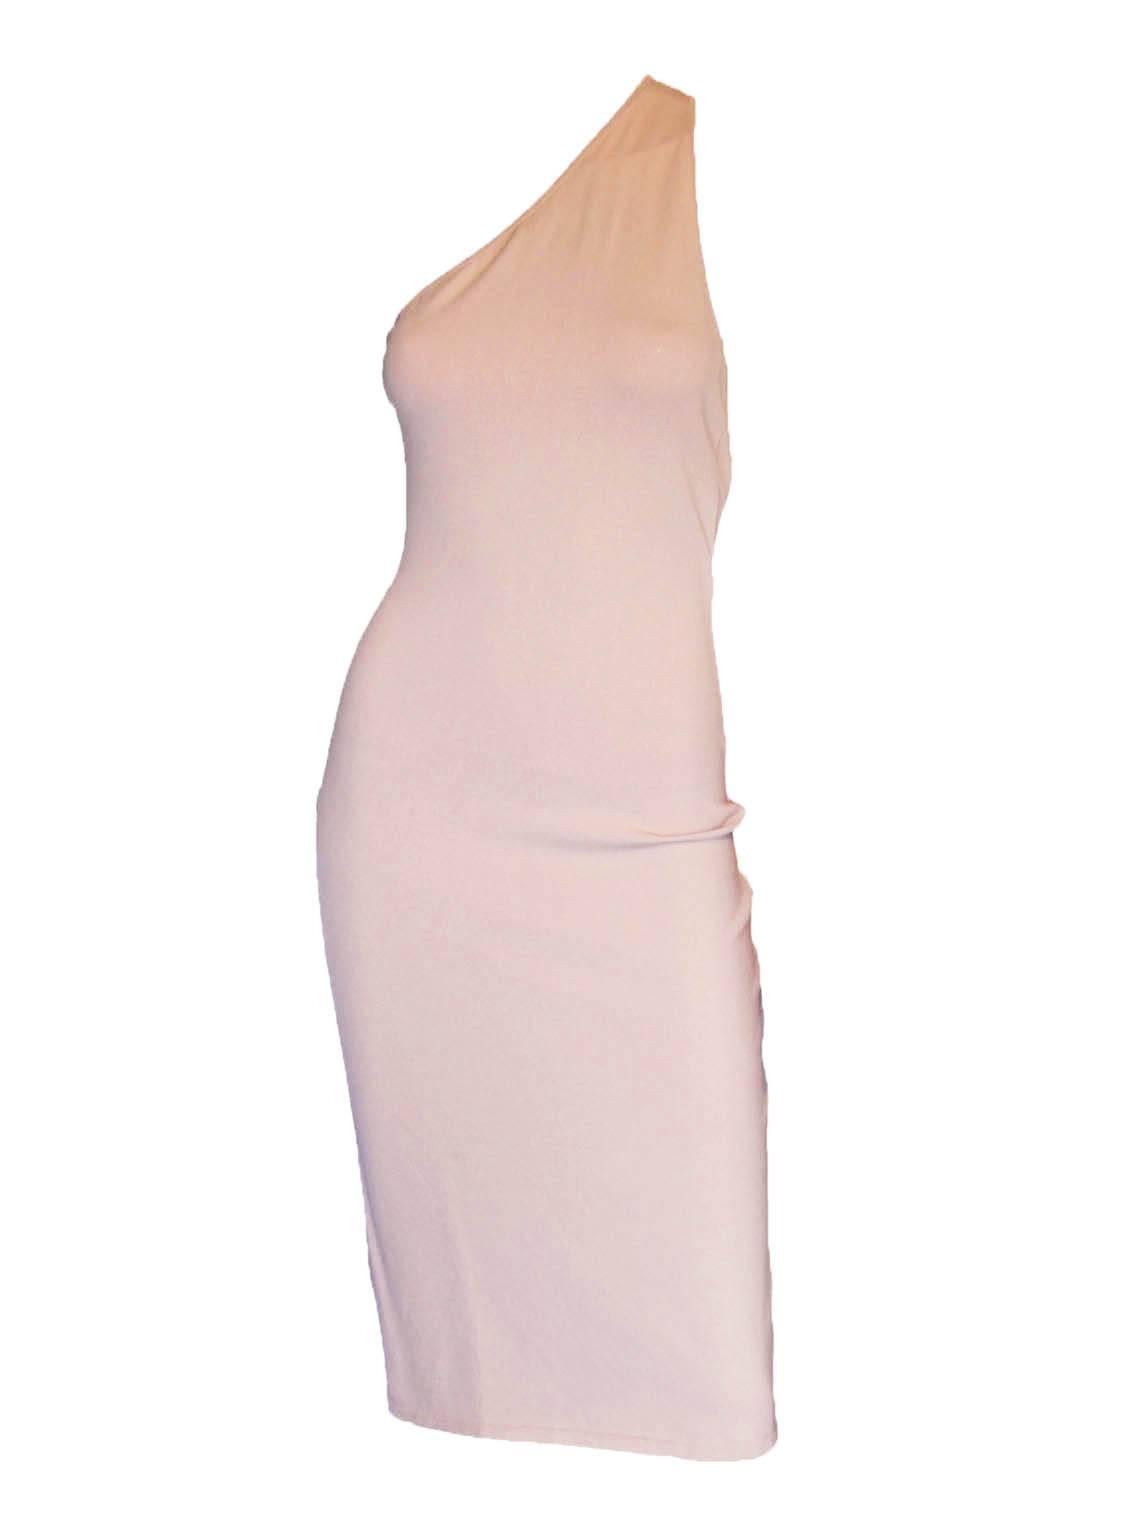 The Most Heavenly Tom Ford For Gucci Spring Summer 2000 Backless Nude Knit Runway Dress!

Who could ever forget Tom Ford's spring summer 2000 collection for Gucci... with all of those heavenly backless dresses? Well this heavenly nude dress,